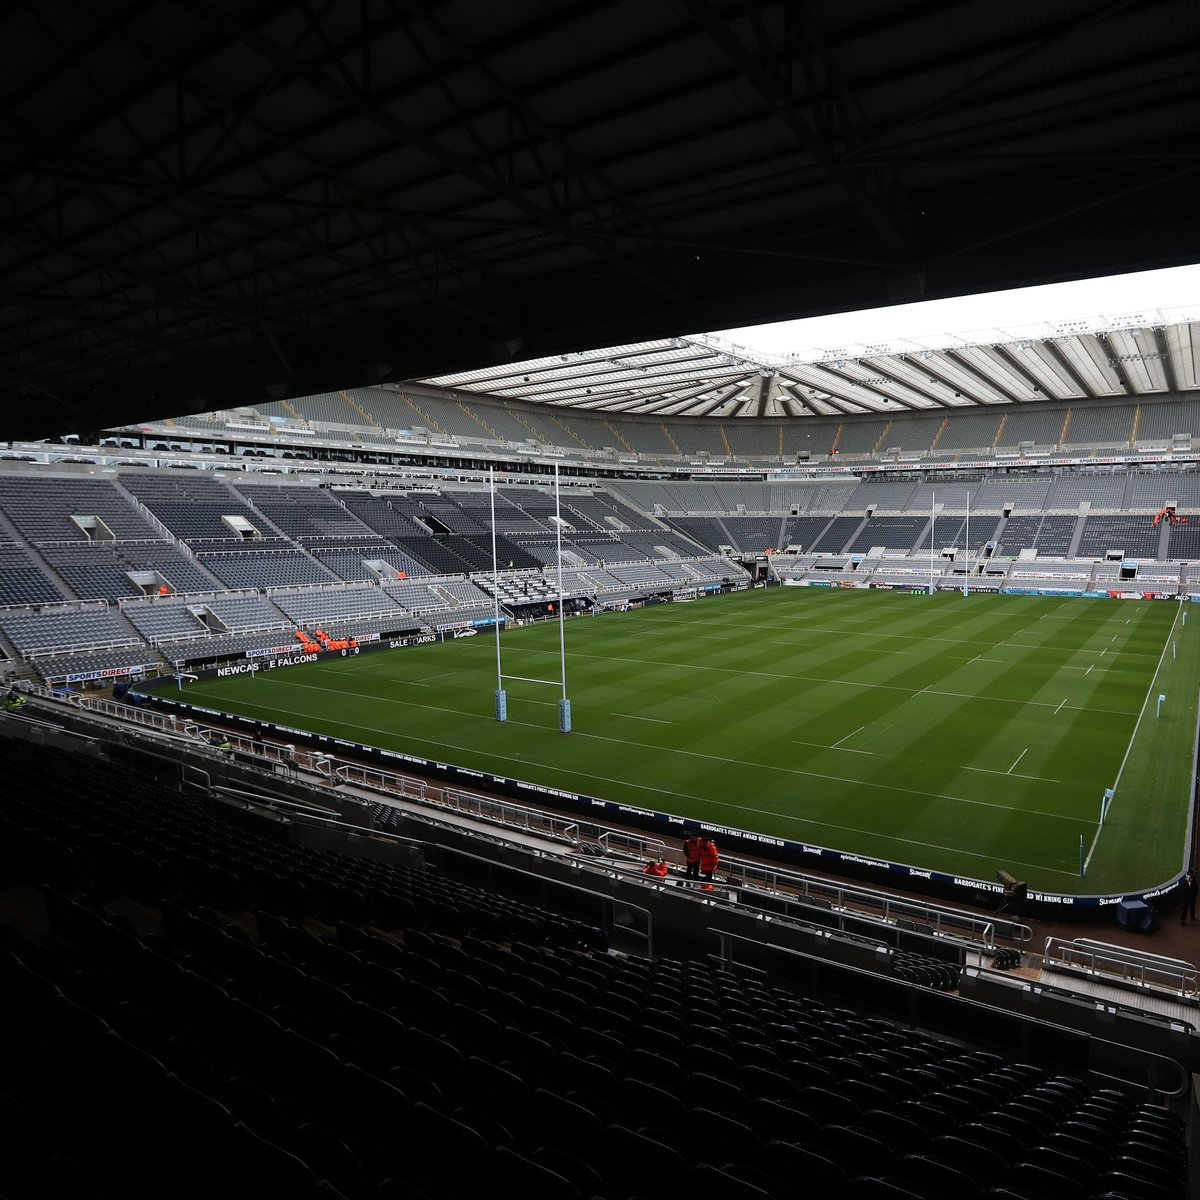 🏉 In 2022, @RLWC2021 is coming to St. James' Park! One year later but 𝙗𝙞𝙜𝙜𝙚𝙧 and 𝙗𝙚𝙩𝙩𝙚𝙧. Book your tickets and hospitality experiences 👇 tickets.rlwc2021.com/?utm_source=Ne…